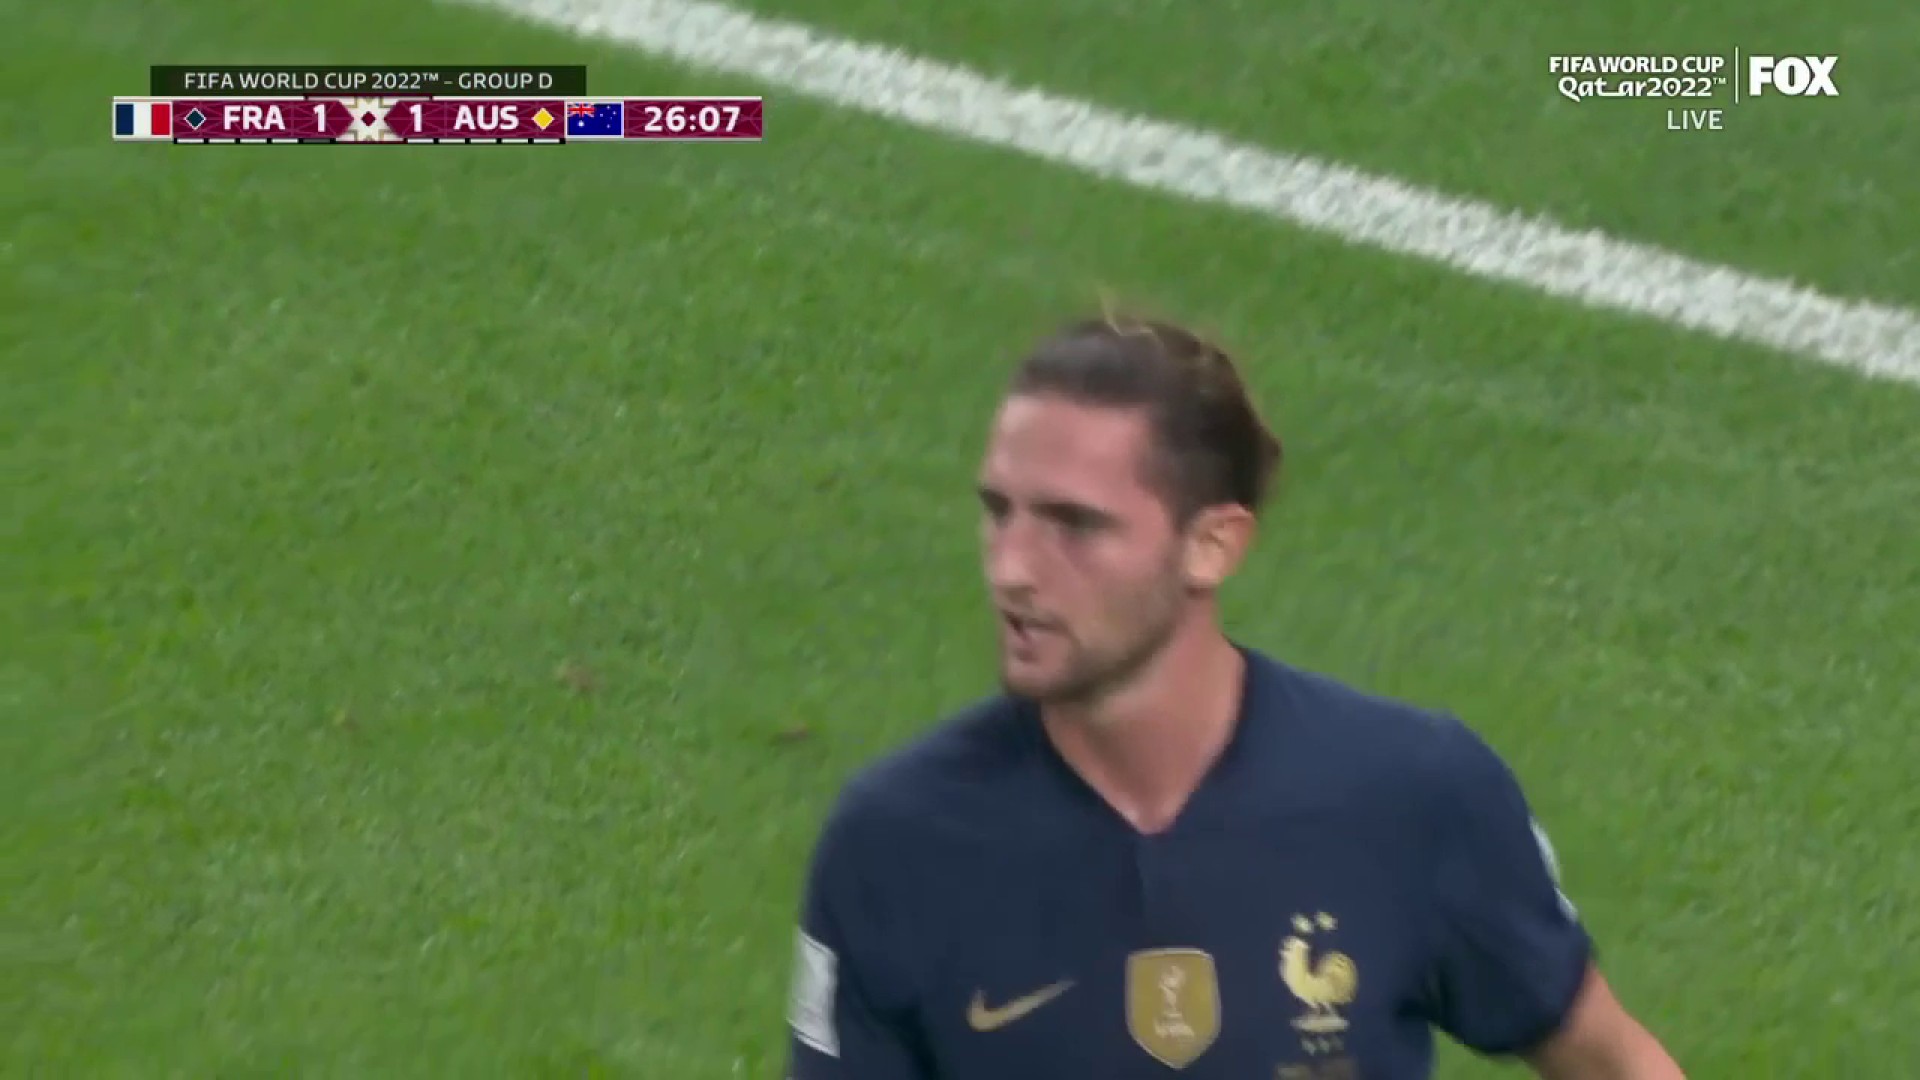 RABIOT TIES IT

France levels the score 💪”